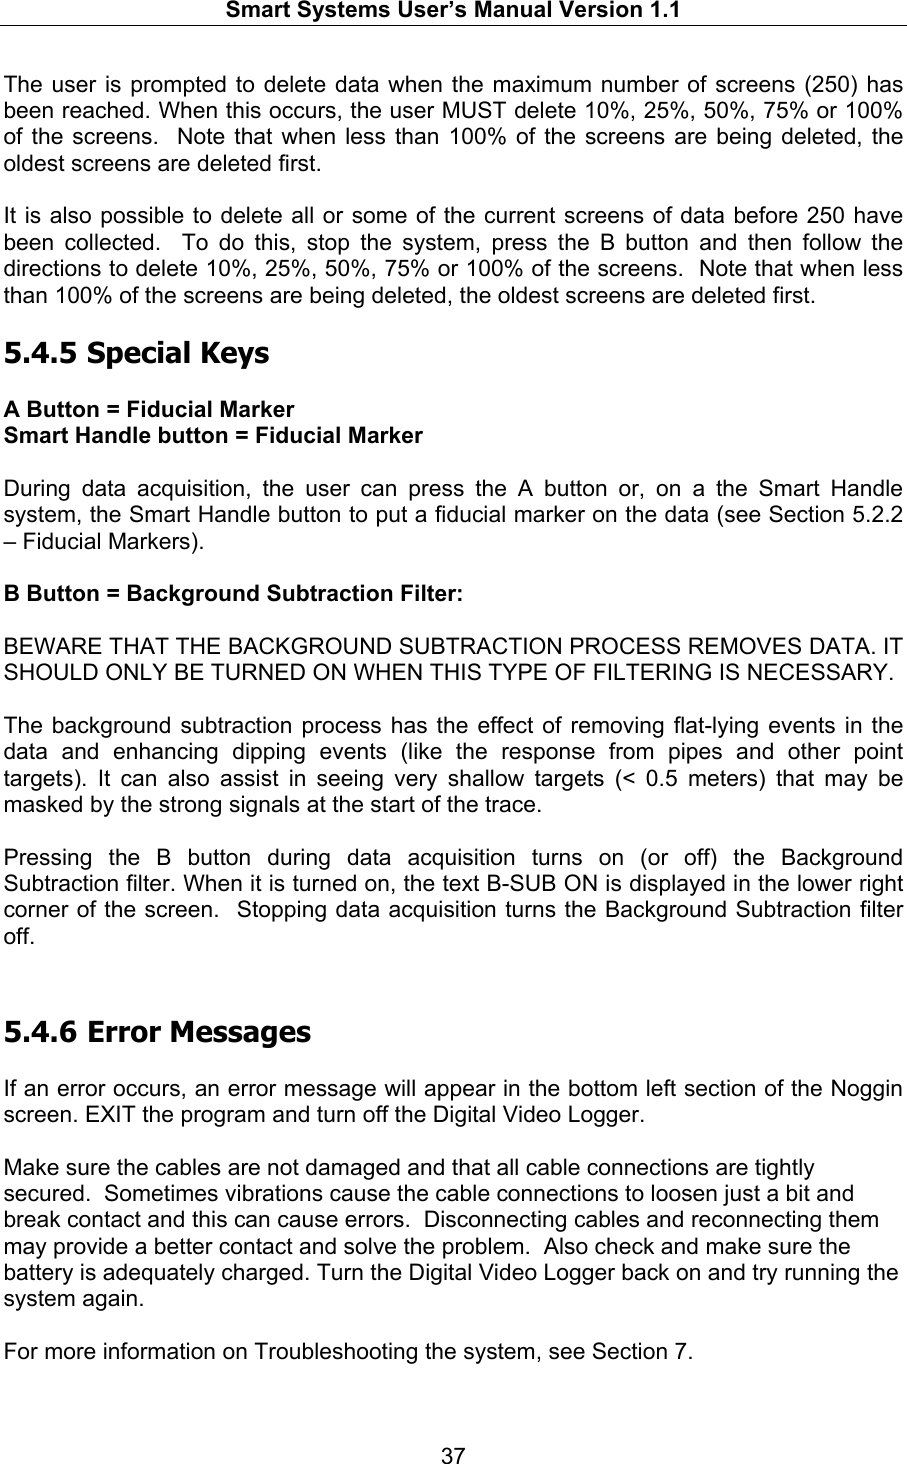   Smart Systems User’s Manual Version 1.1  37  The user is prompted to delete data when the maximum number of screens (250) has been reached. When this occurs, the user MUST delete 10%, 25%, 50%, 75% or 100% of the screens.  Note that when less than 100% of the screens are being deleted, the oldest screens are deleted first.  It is also possible to delete all or some of the current screens of data before 250 have been collected.  To do this, stop the system, press the B button and then follow the directions to delete 10%, 25%, 50%, 75% or 100% of the screens.  Note that when less than 100% of the screens are being deleted, the oldest screens are deleted first.  5.4.5  Special Keys  A Button = Fiducial Marker  Smart Handle button = Fiducial Marker  During data acquisition, the user can press the A button or, on a the Smart Handle system, the Smart Handle button to put a fiducial marker on the data (see Section 5.2.2 – Fiducial Markers).    B Button = Background Subtraction Filter:   BEWARE THAT THE BACKGROUND SUBTRACTION PROCESS REMOVES DATA. IT SHOULD ONLY BE TURNED ON WHEN THIS TYPE OF FILTERING IS NECESSARY.  The background subtraction process has the effect of removing flat-lying events in the data and enhancing dipping events (like the response from pipes and other point targets). It can also assist in seeing very shallow targets (&lt; 0.5 meters) that may be masked by the strong signals at the start of the trace.  Pressing the B button during data acquisition turns on (or off) the Background Subtraction filter. When it is turned on, the text B-SUB ON is displayed in the lower right corner of the screen.  Stopping data acquisition turns the Background Subtraction filter off.  5.4.6  Error Messages  If an error occurs, an error message will appear in the bottom left section of the Noggin screen. EXIT the program and turn off the Digital Video Logger.   Make sure the cables are not damaged and that all cable connections are tightly secured.  Sometimes vibrations cause the cable connections to loosen just a bit and break contact and this can cause errors.  Disconnecting cables and reconnecting them may provide a better contact and solve the problem.  Also check and make sure the battery is adequately charged. Turn the Digital Video Logger back on and try running the system again.  For more information on Troubleshooting the system, see Section 7.  